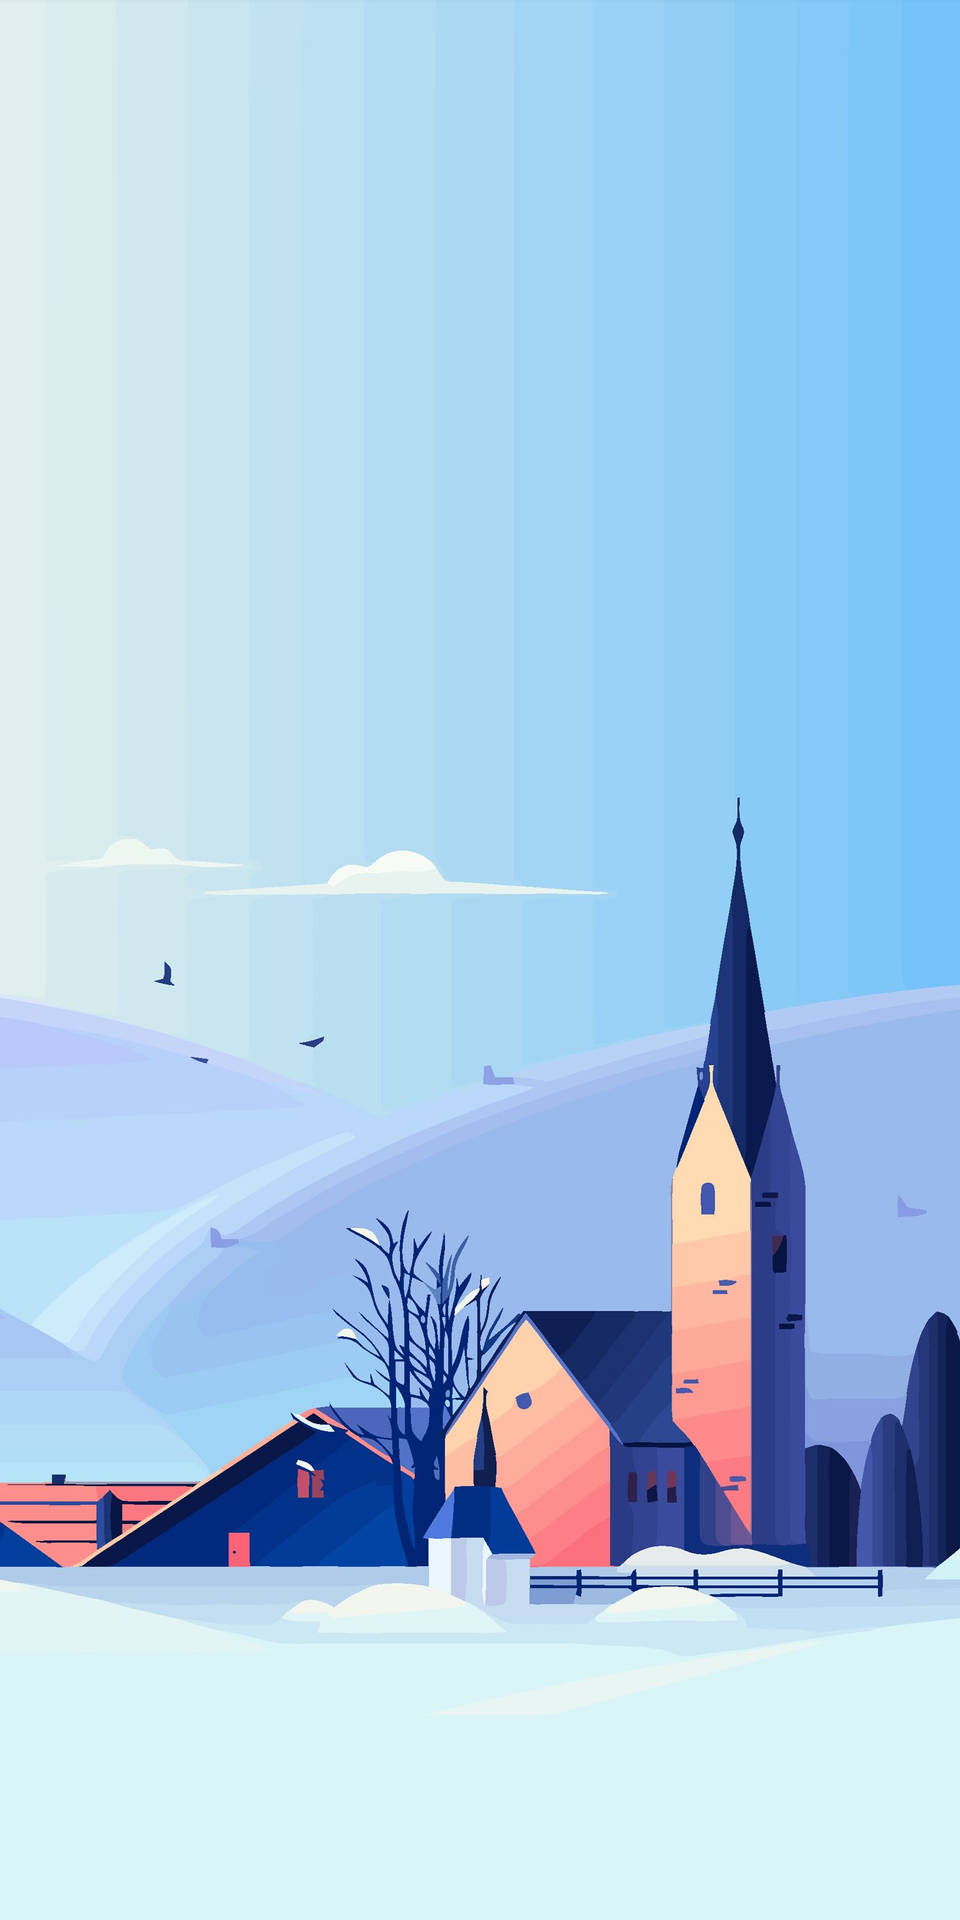 Snow-covered Church Illustration Iphone Wallpaper